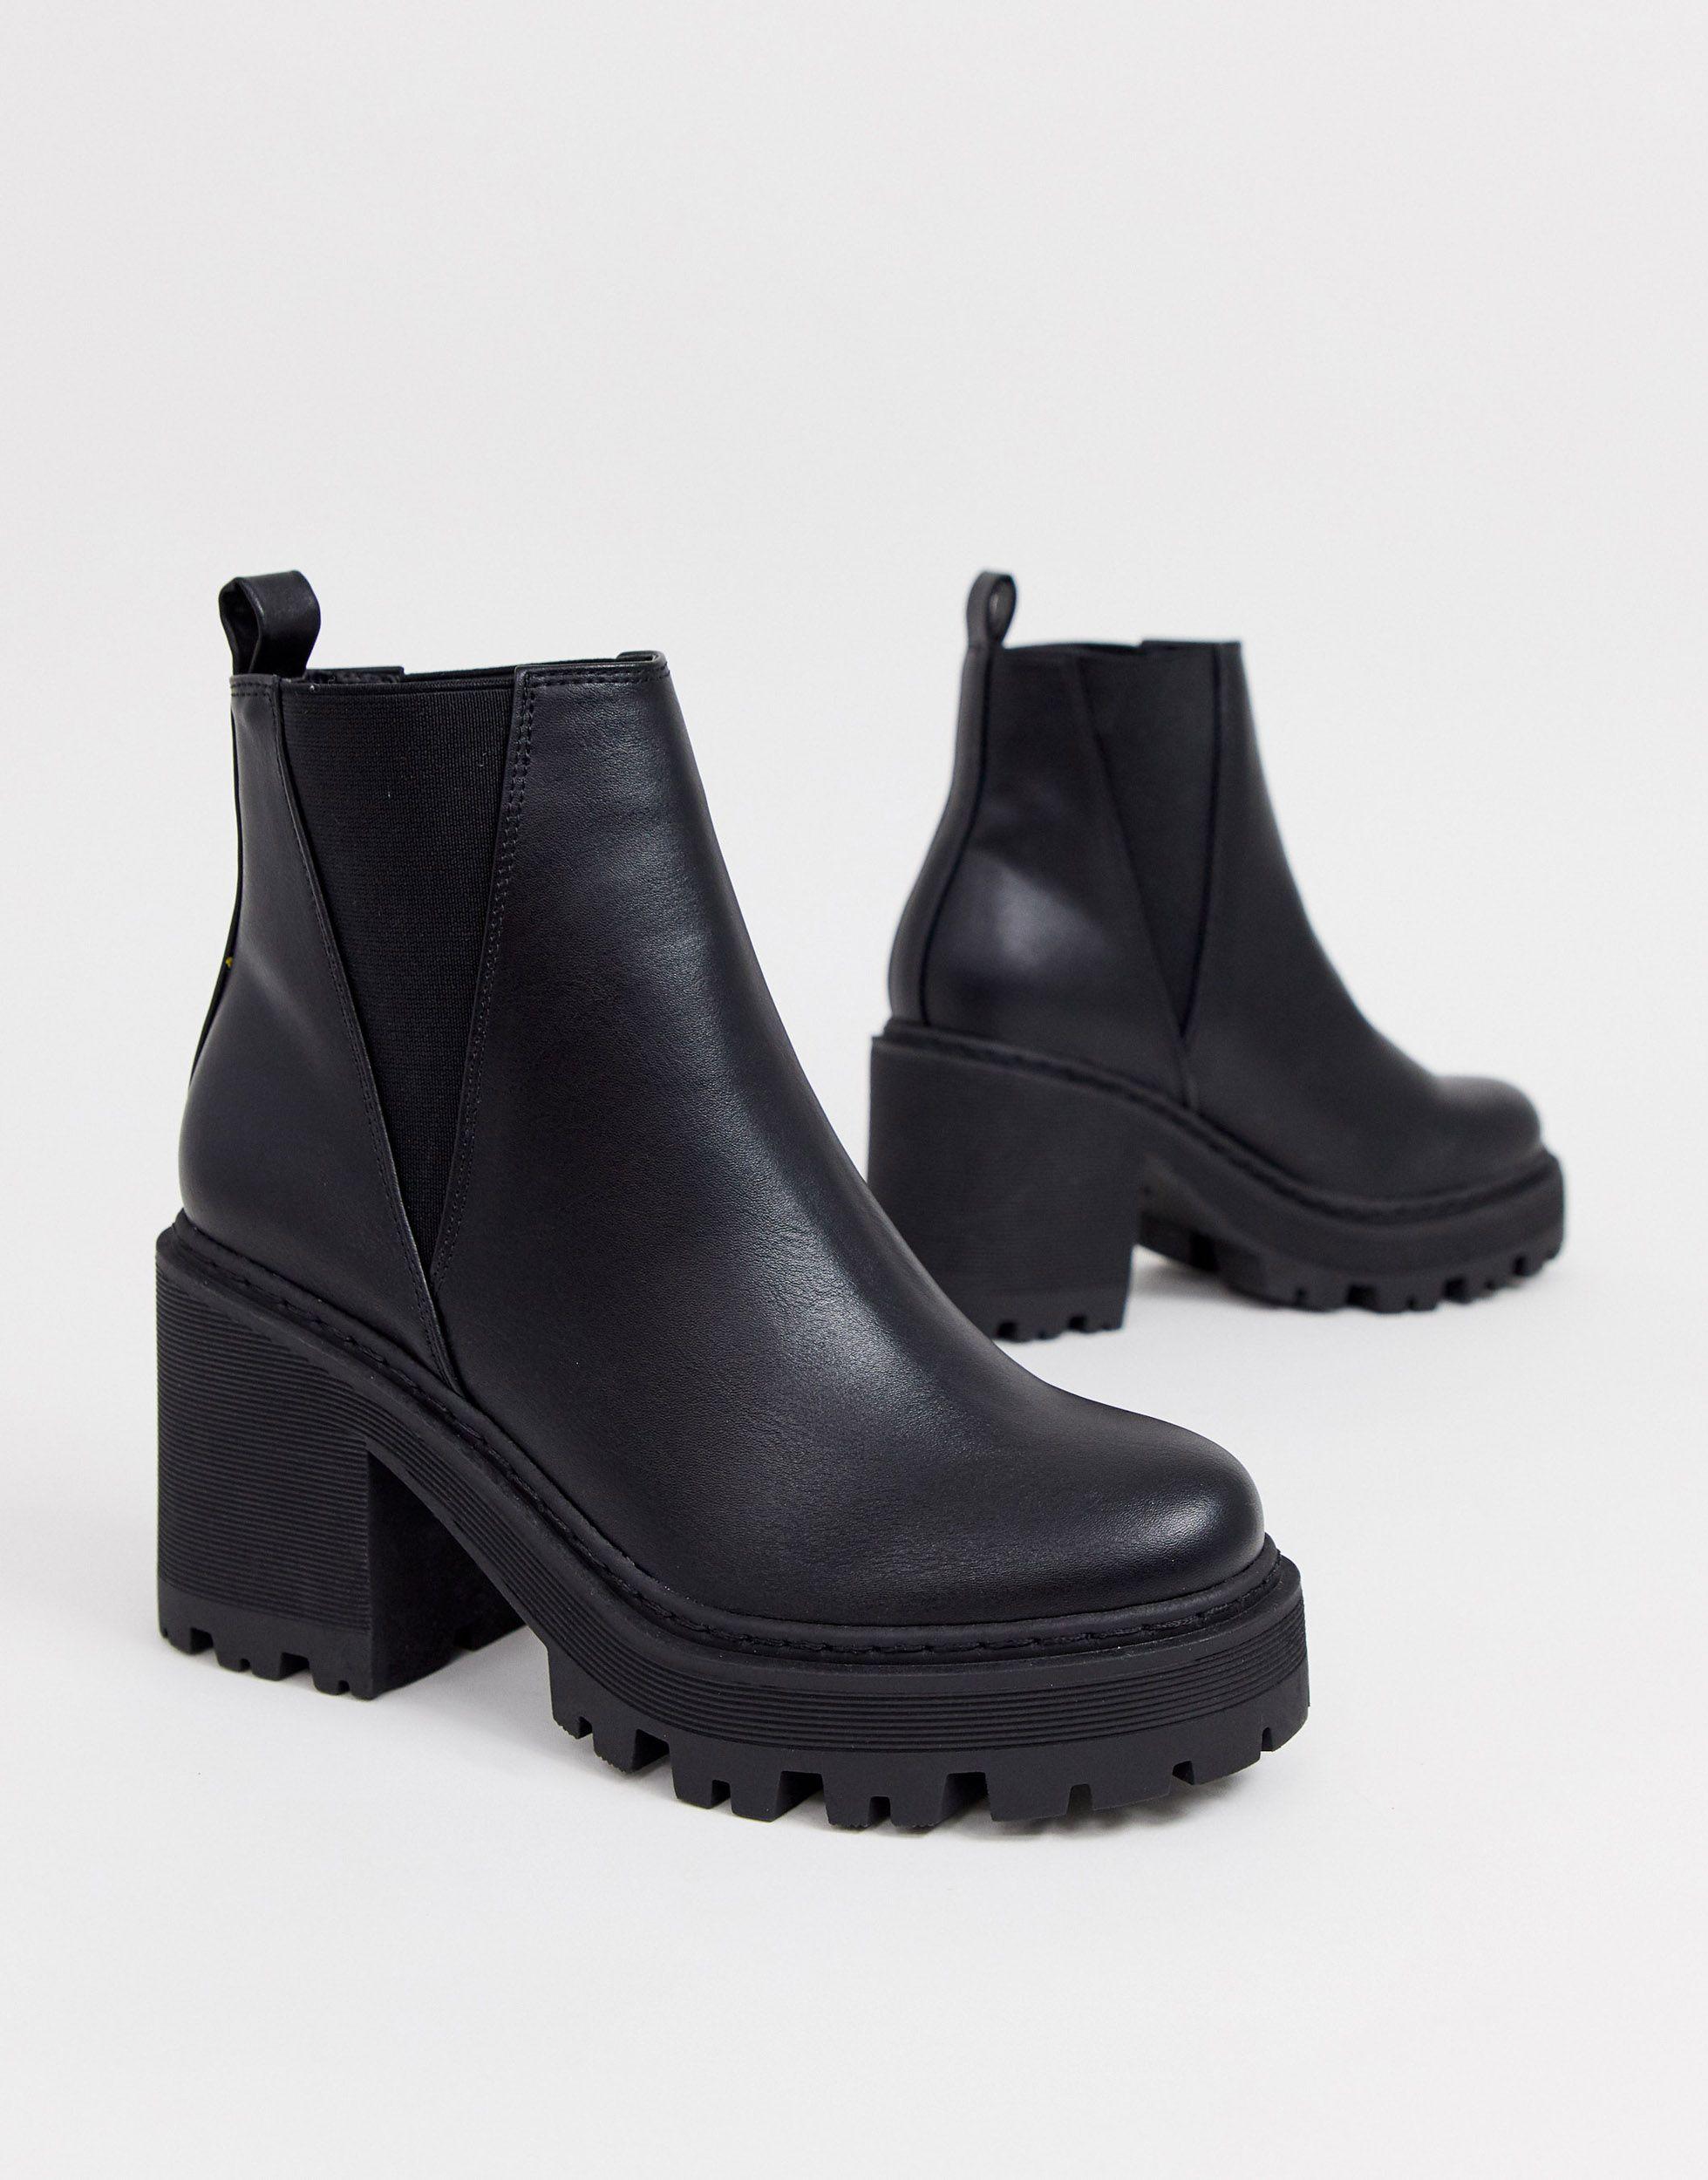 Truffle Collection Chunky Heeled Chelsea Boots Hot Sale | bellvalefarms.com